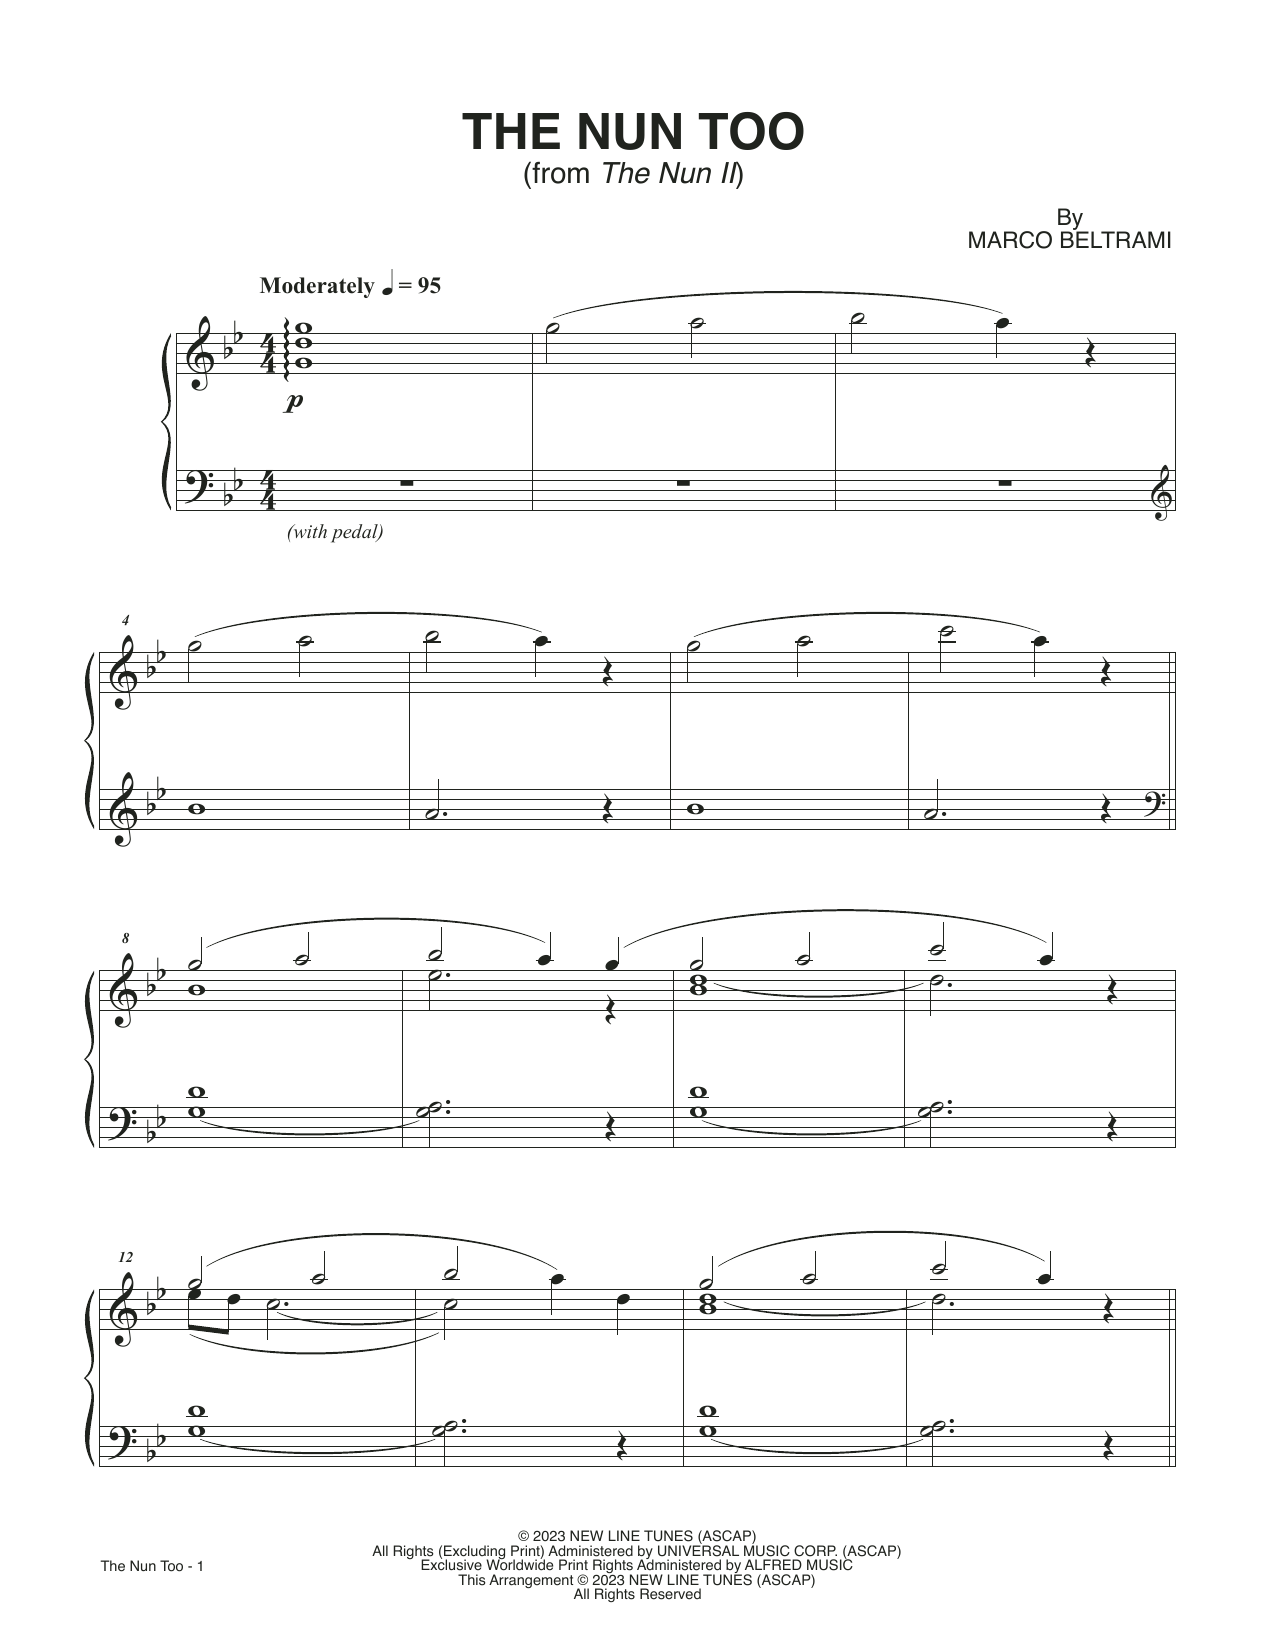 Marco Beltrami The Nun Too (from The Nun II) sheet music notes printable PDF score